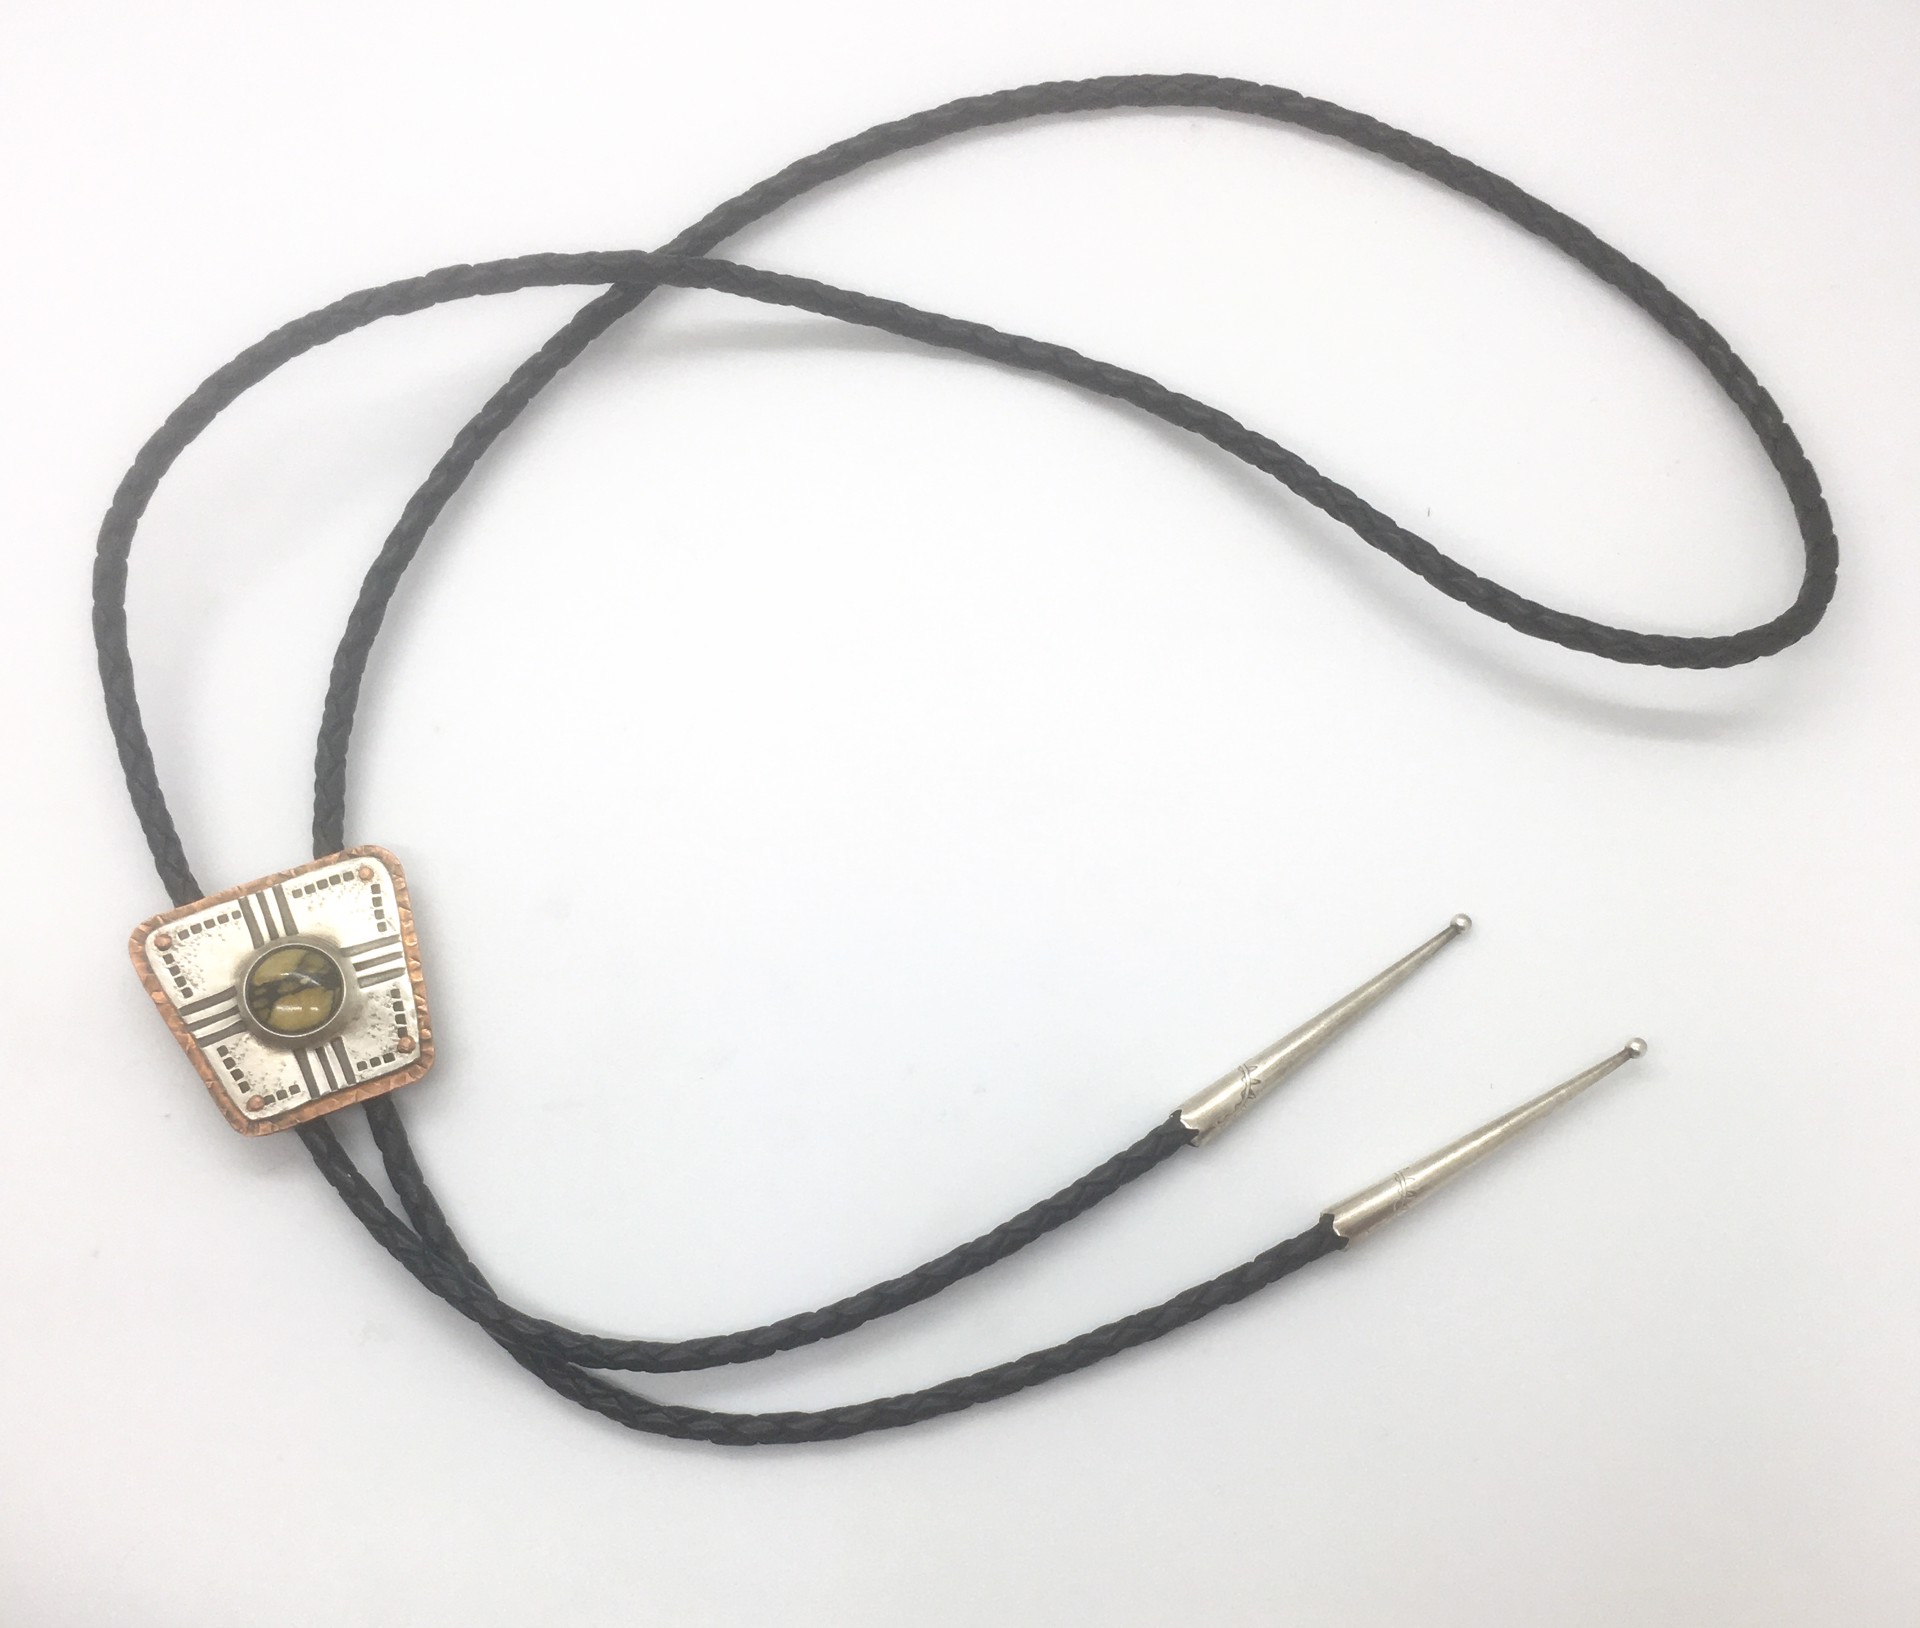 Handmade Silver and Ochre Turquoise Riveted Bolo Tie by Grace Ashford